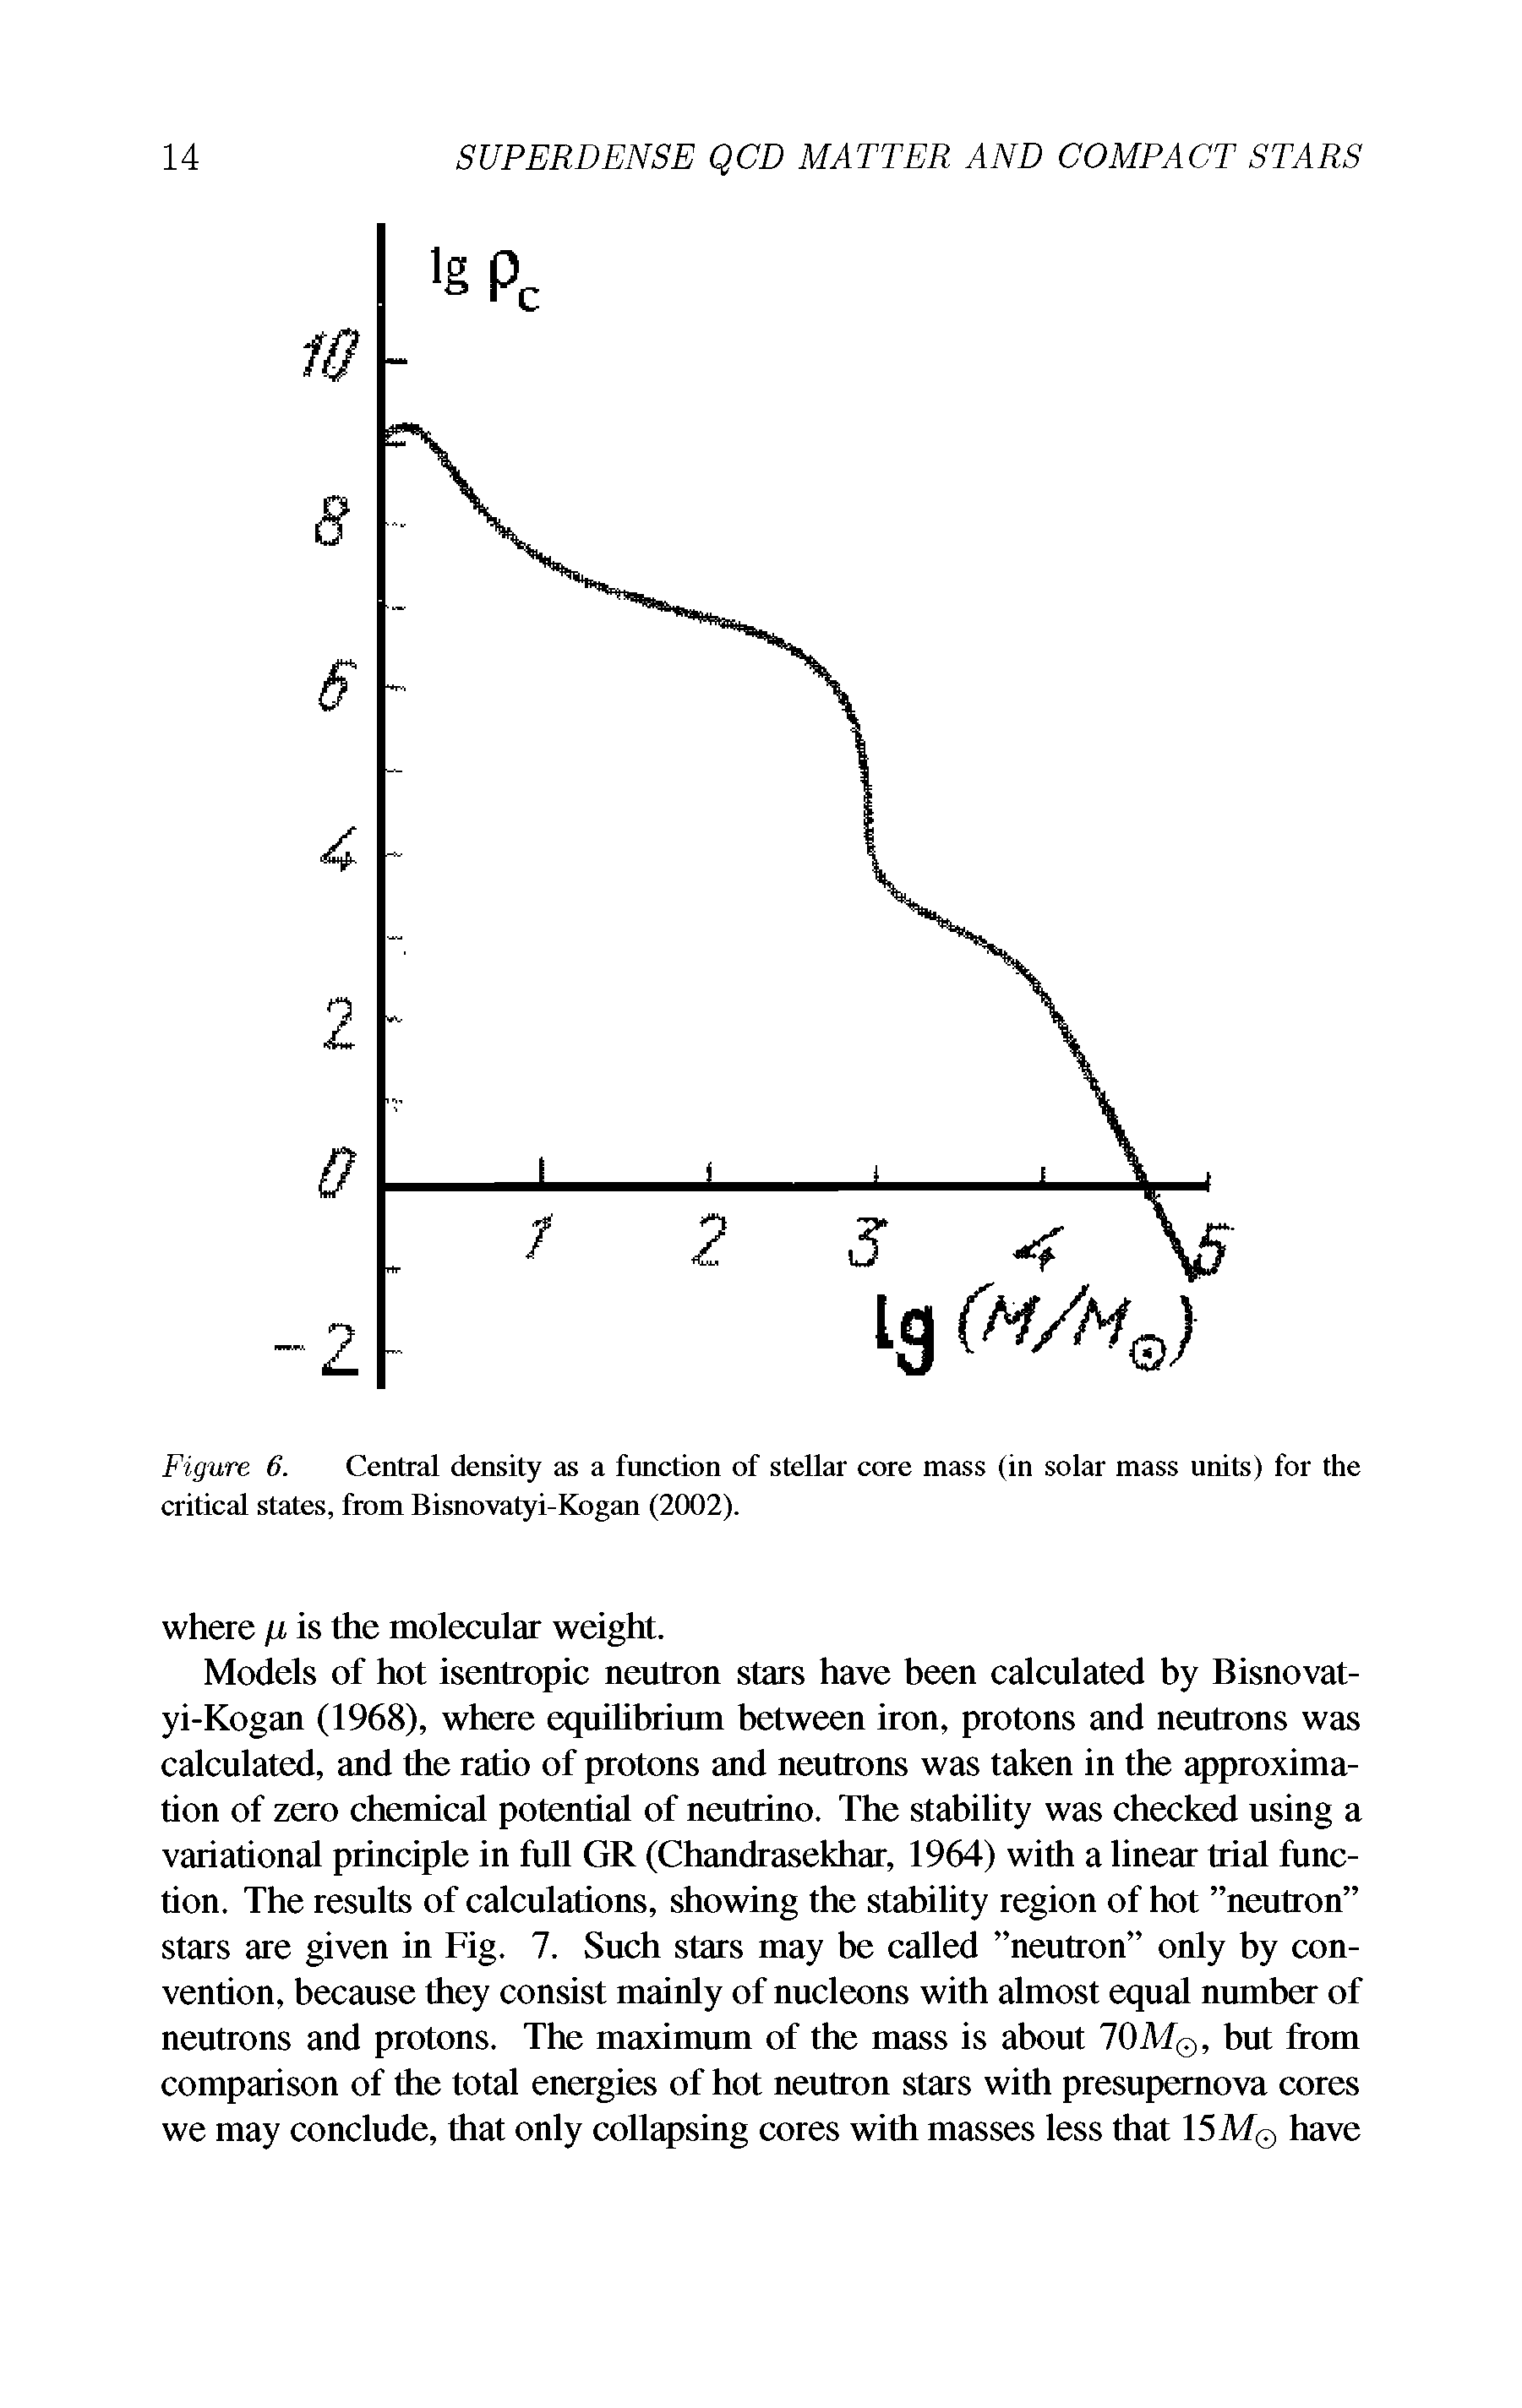 Figure 6. Central density as a function of stellar core mass (in solar mass units) for the critical states, from Bisnovatyi-Kogan (2002).